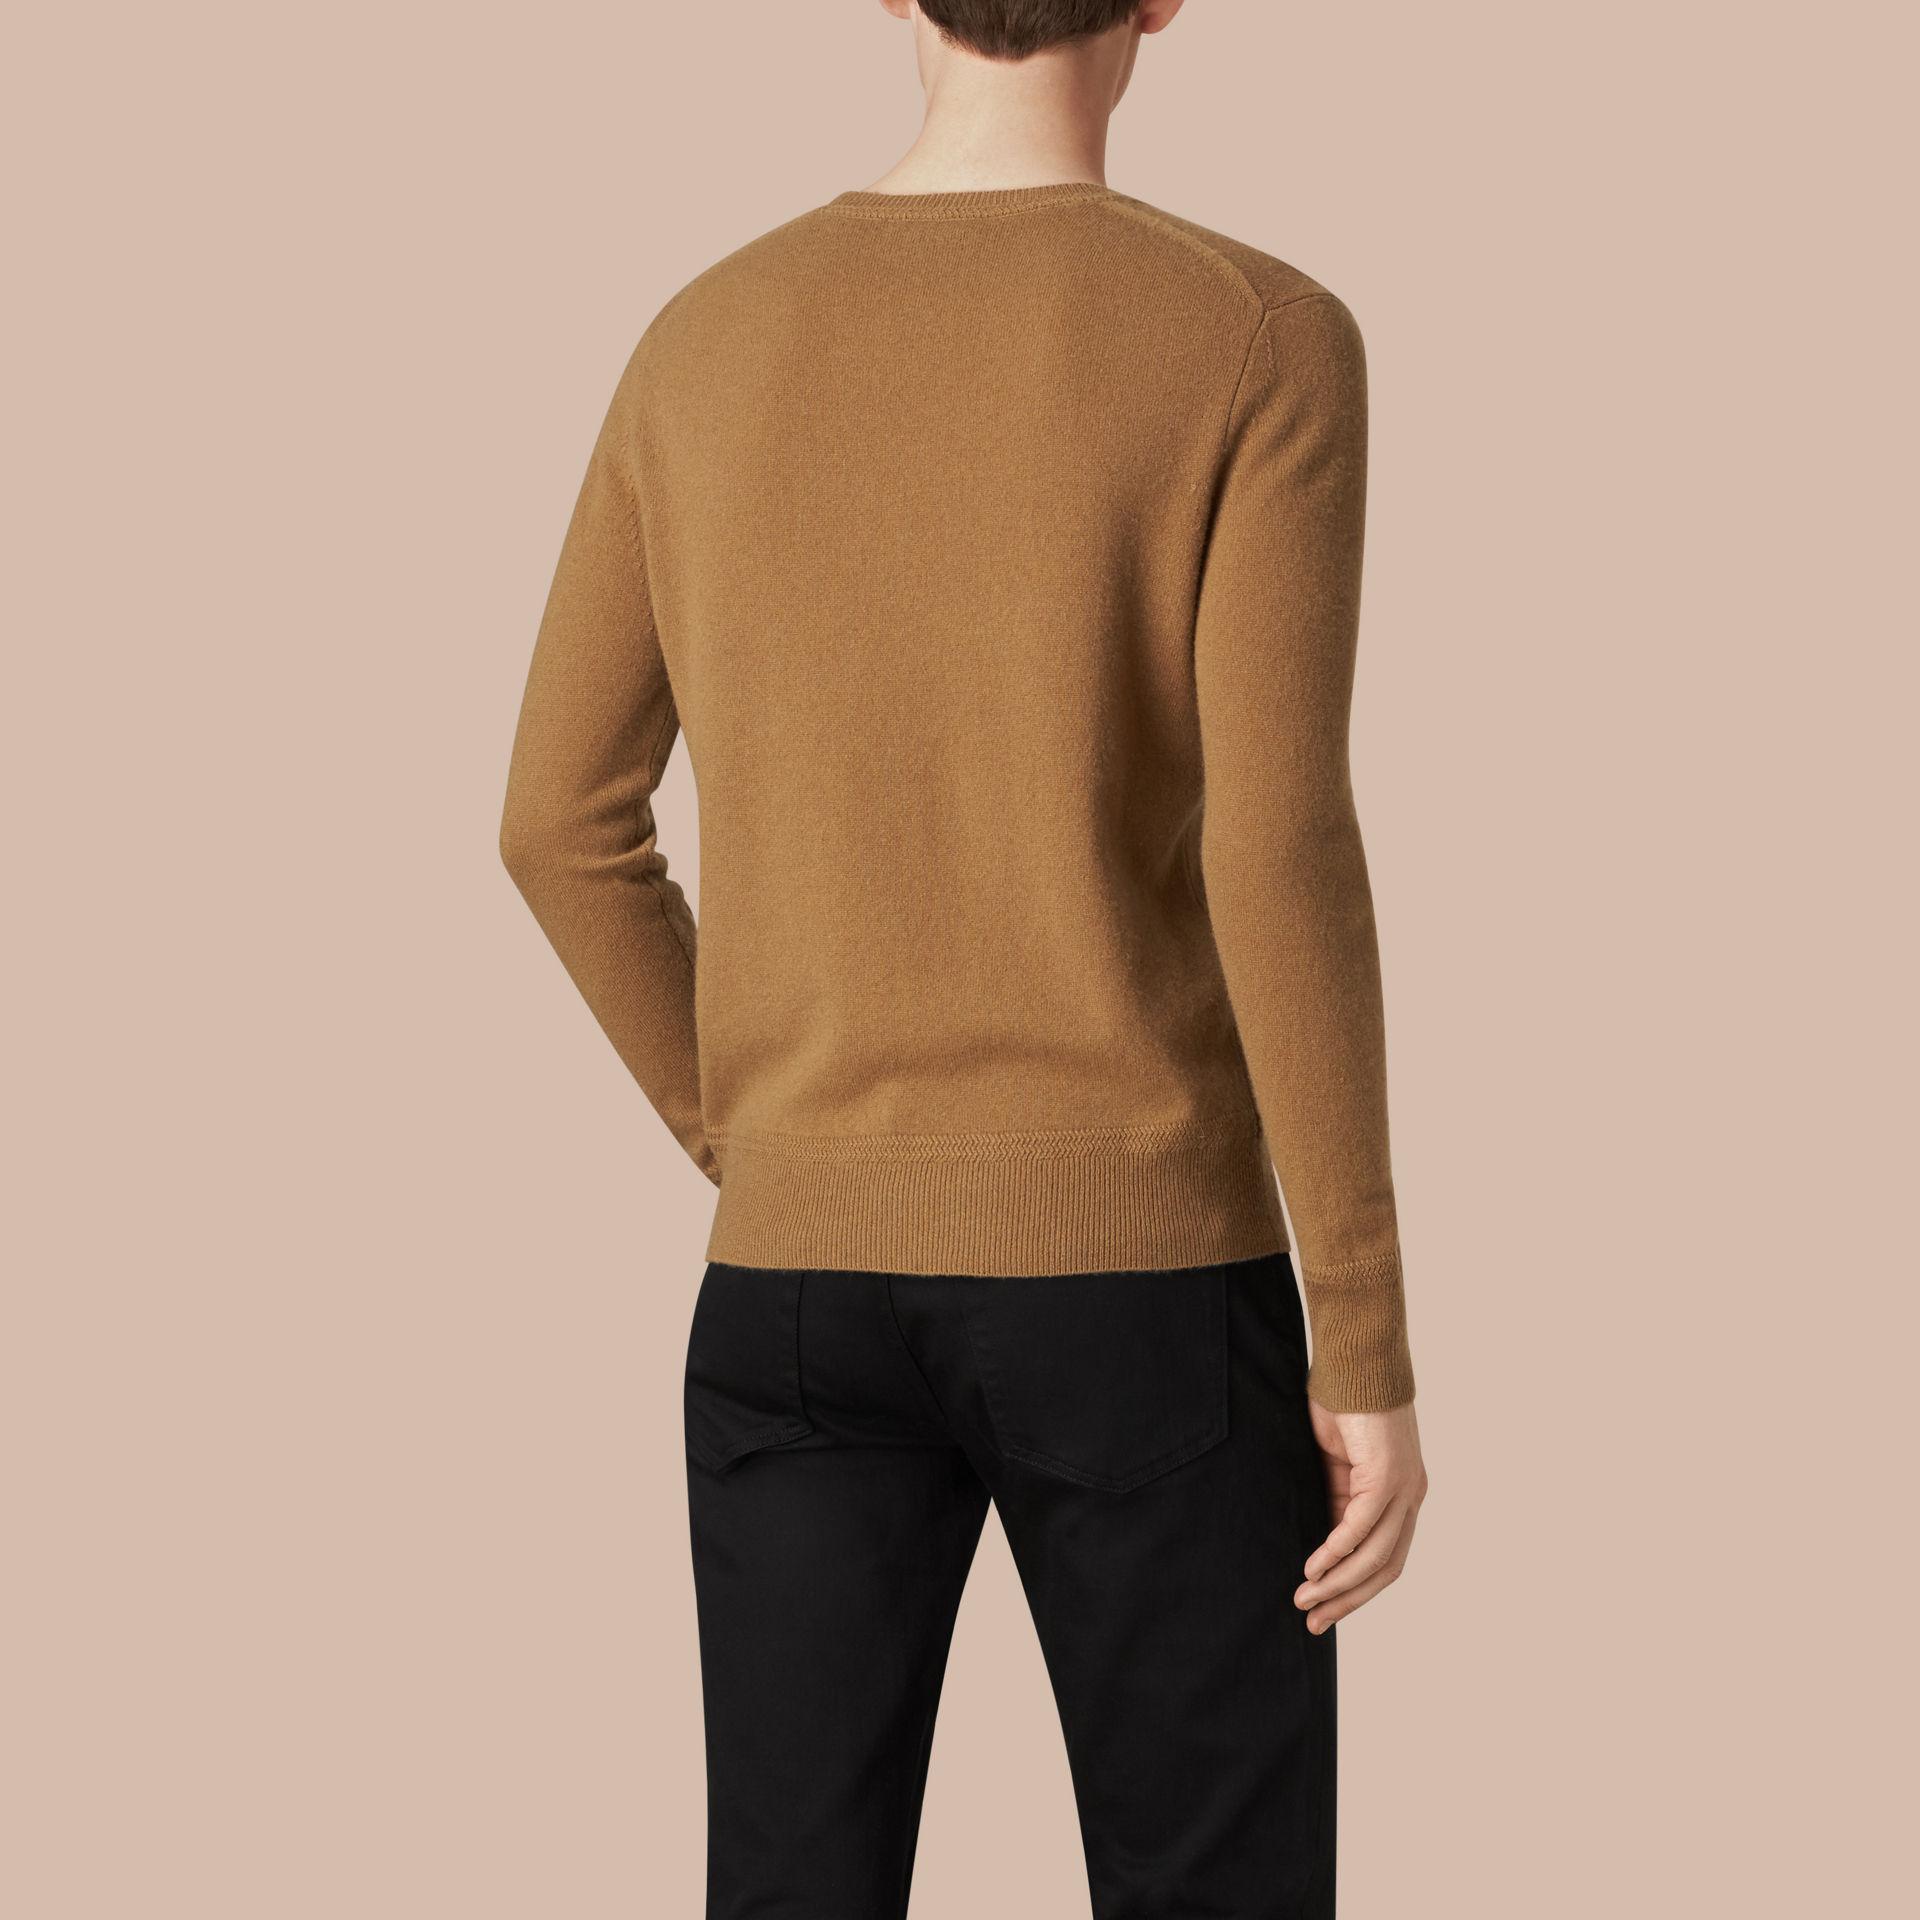 Lyst - Burberry Crew Neck Cashmere Sweater Mid Camel in Brown for Men